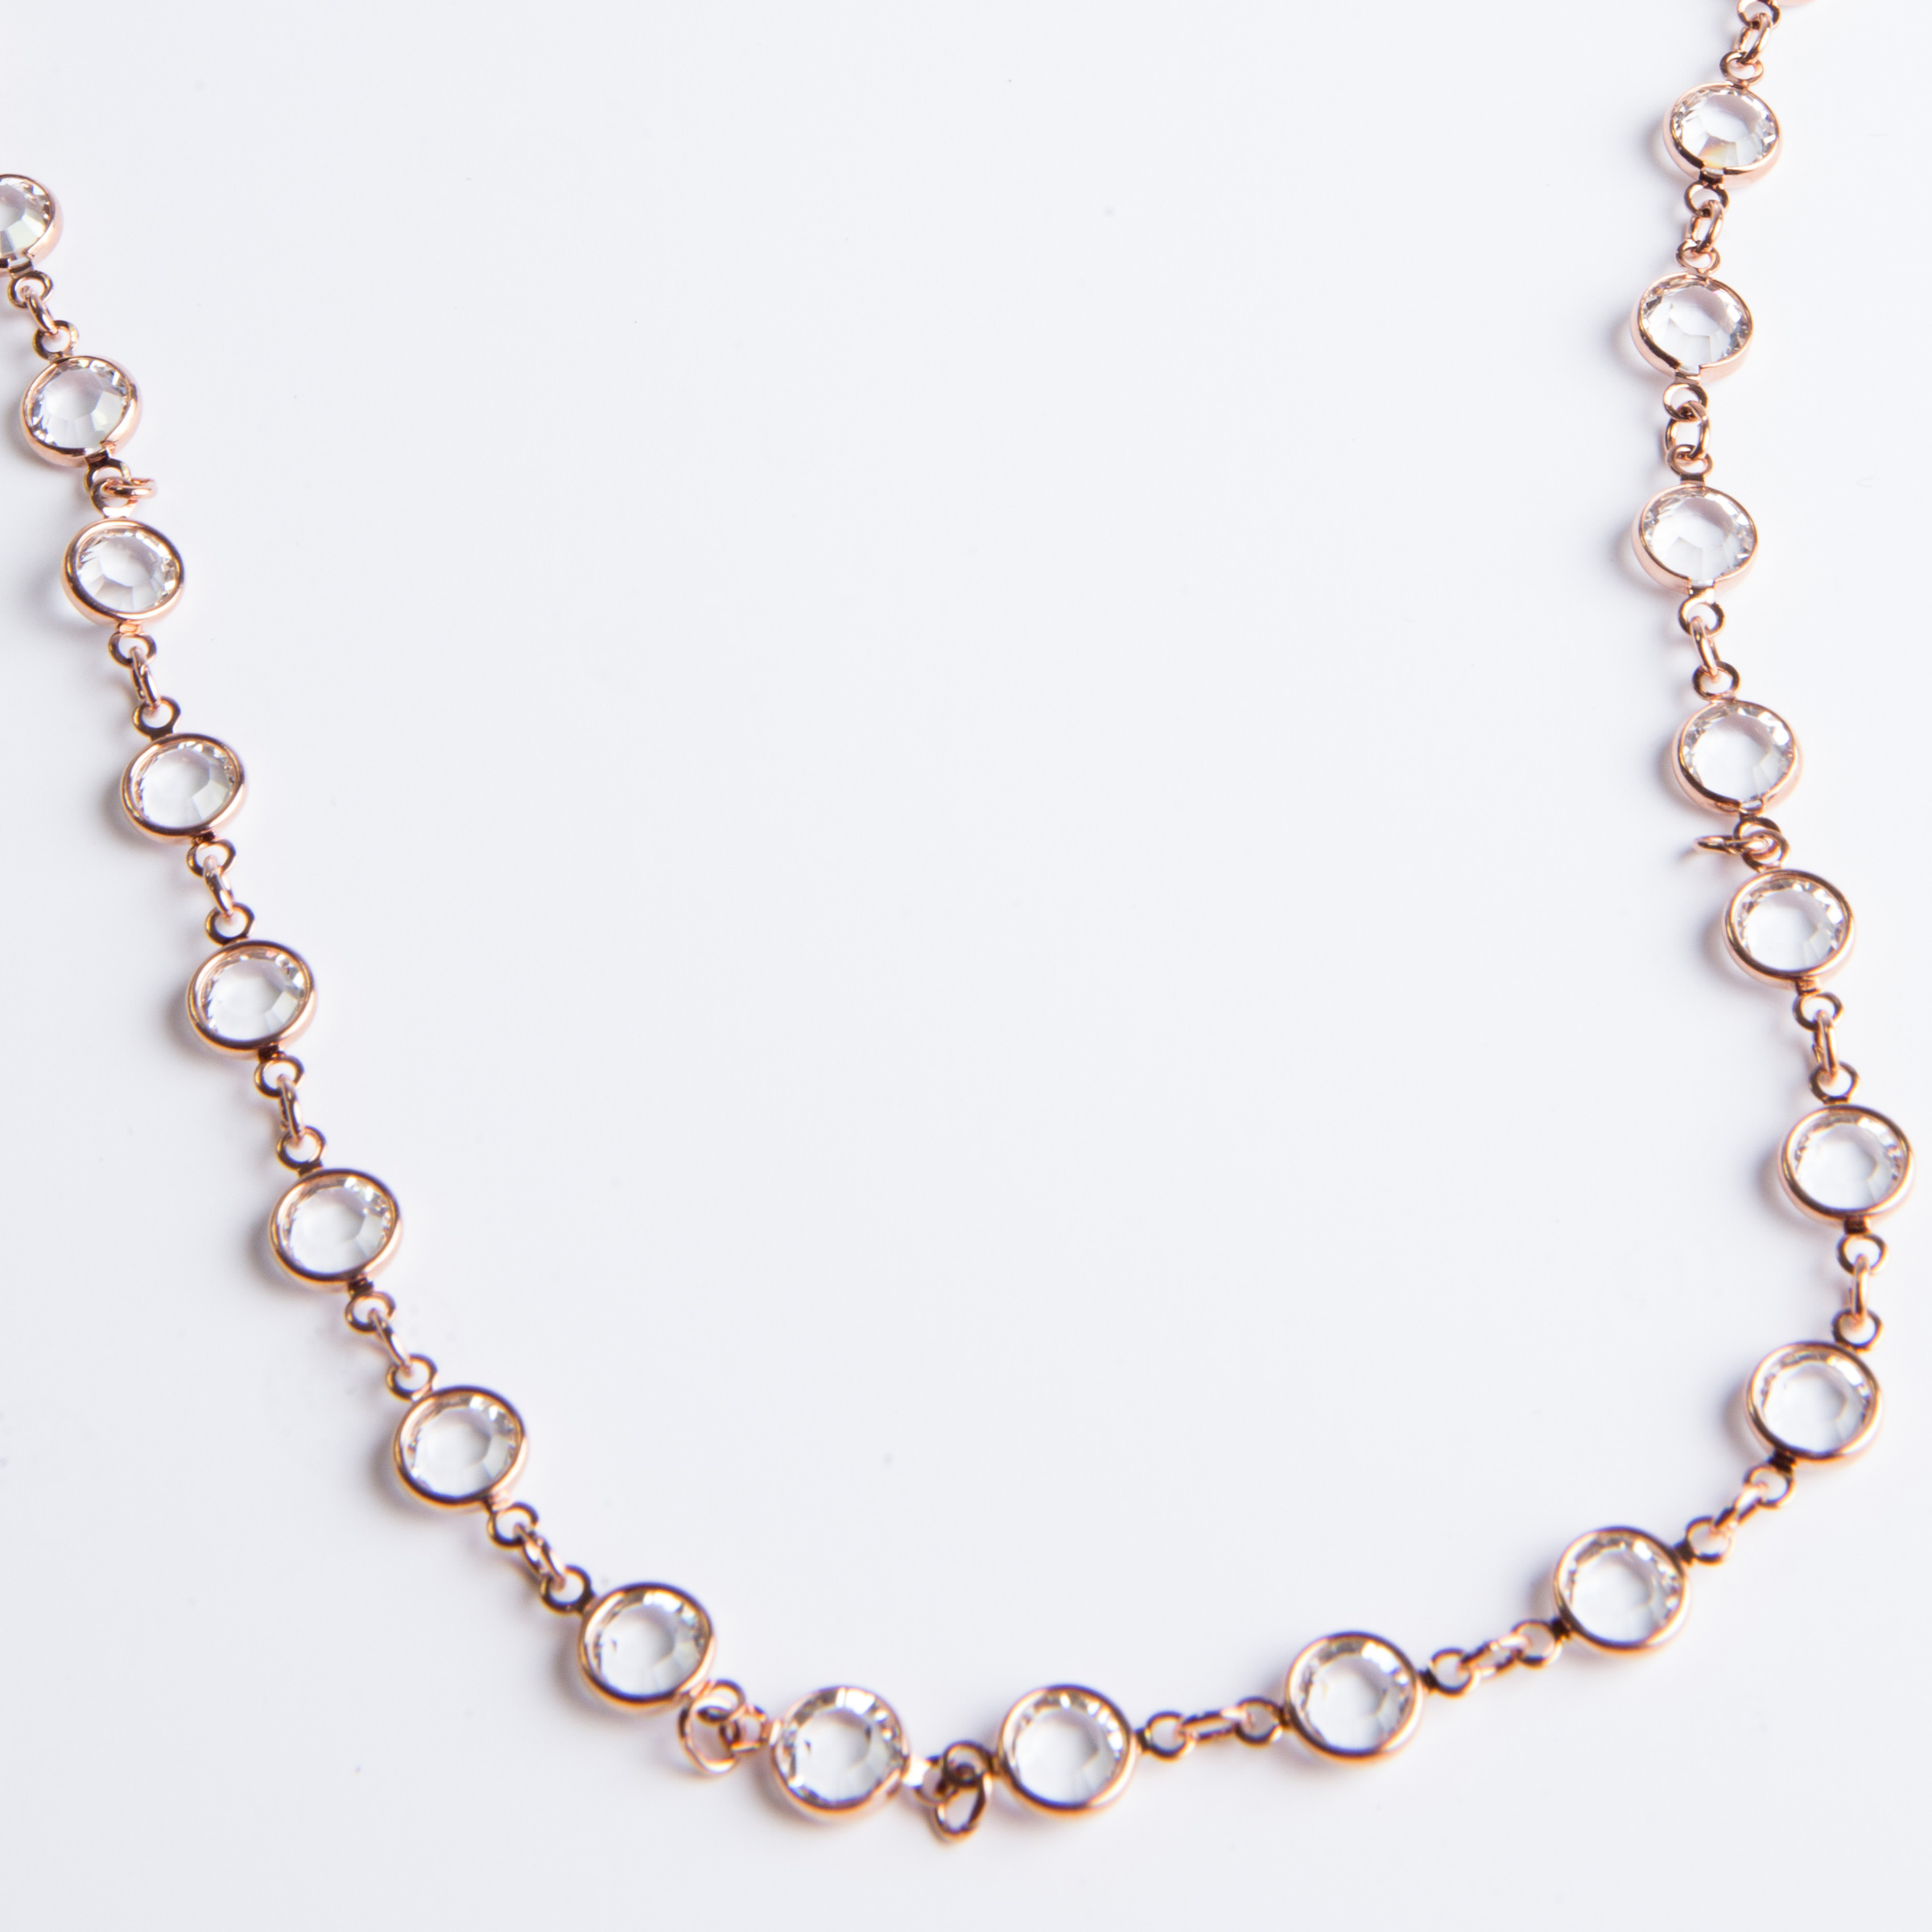 Blush Chanelle Necklace, Crystal